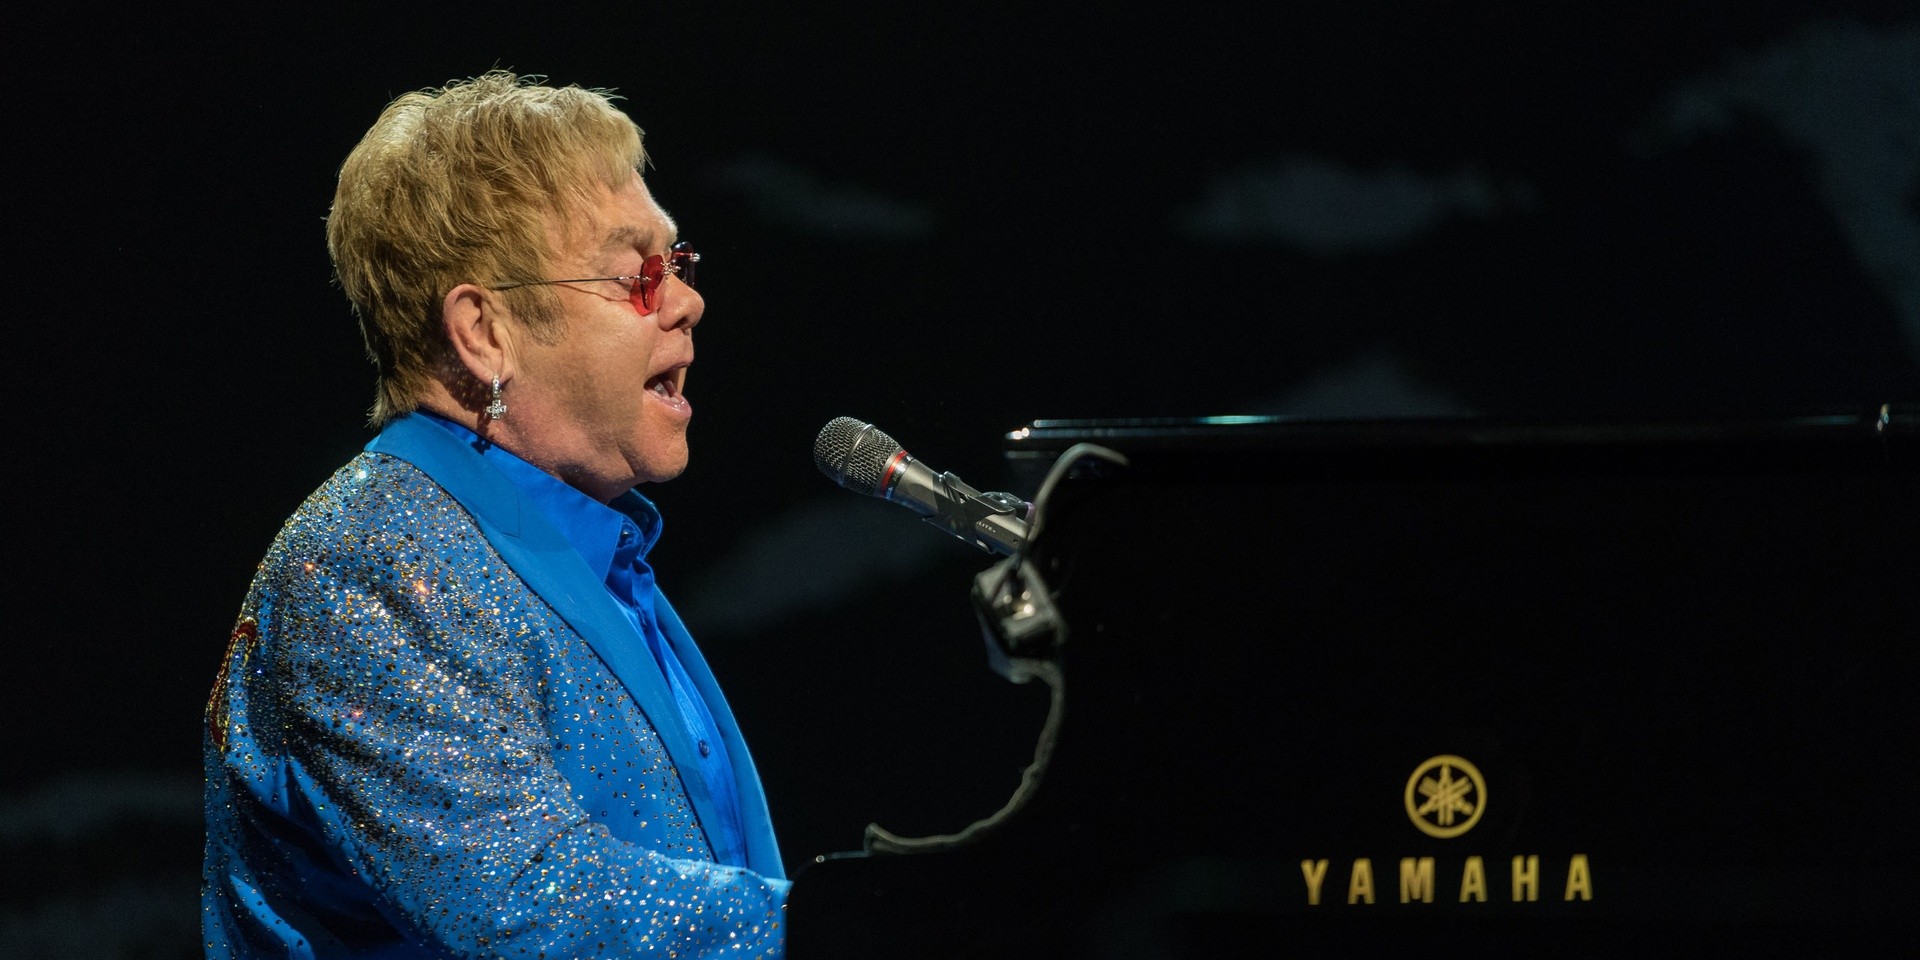 Elton John enthralls crowd during first night at The Star Theatre